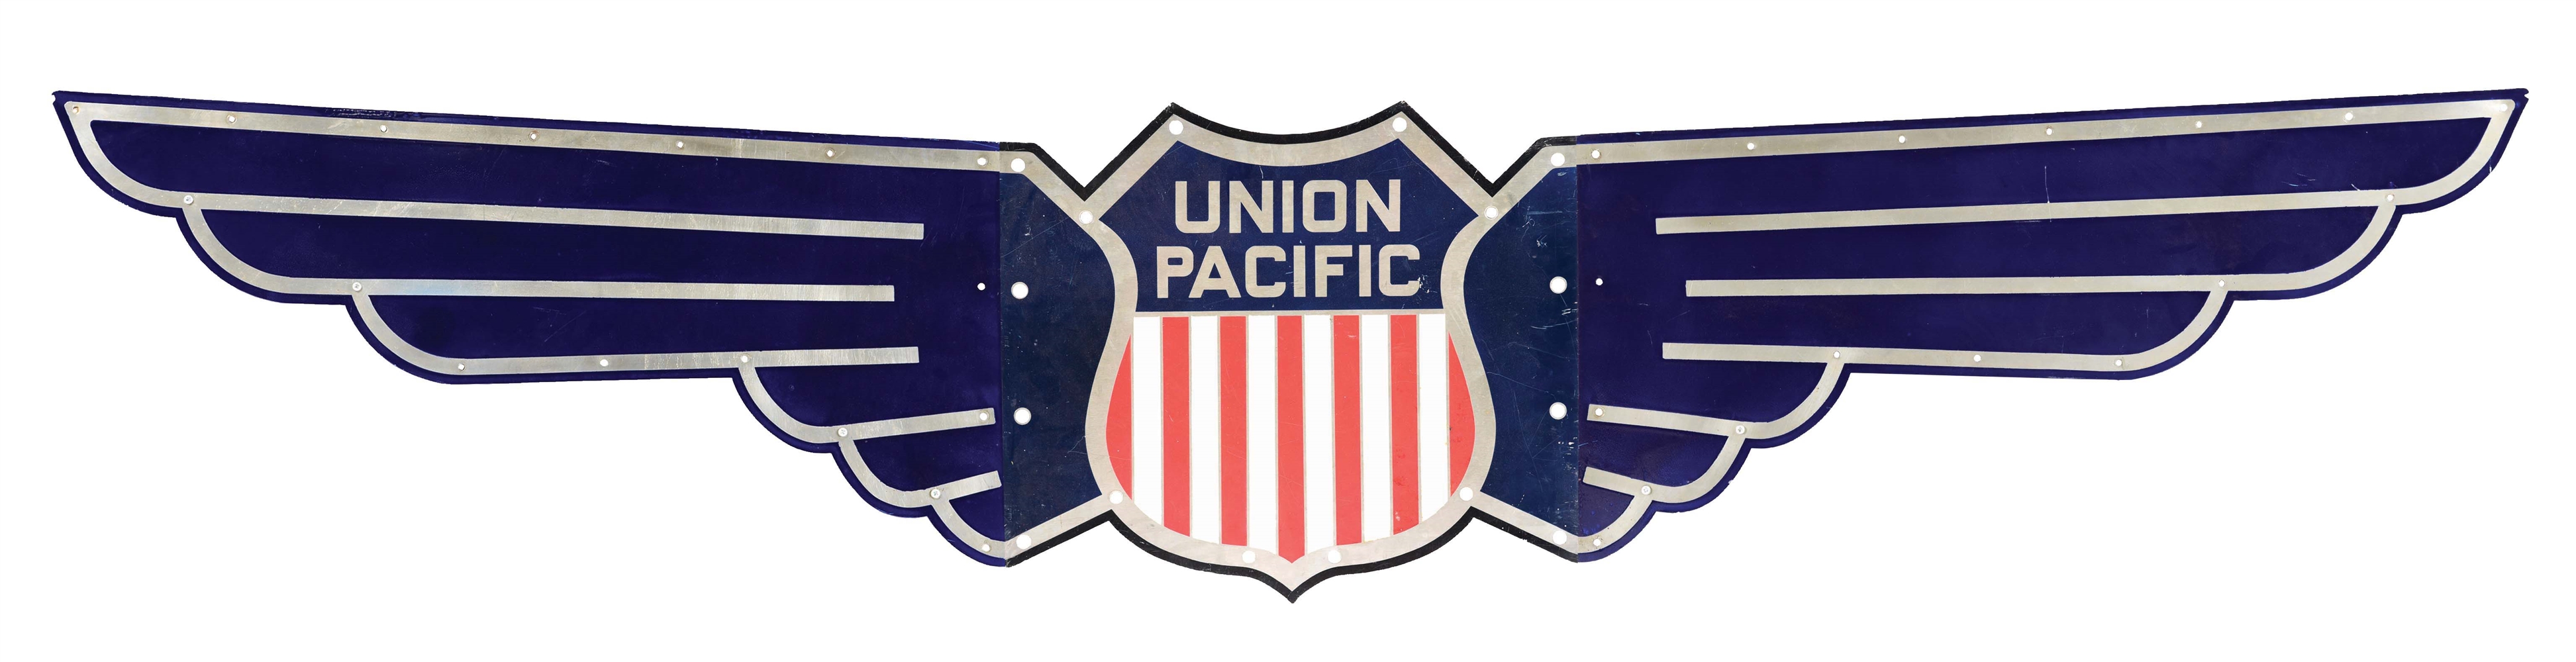 UNION PACIFIC RAILROAD STAINLESS "WINGS".